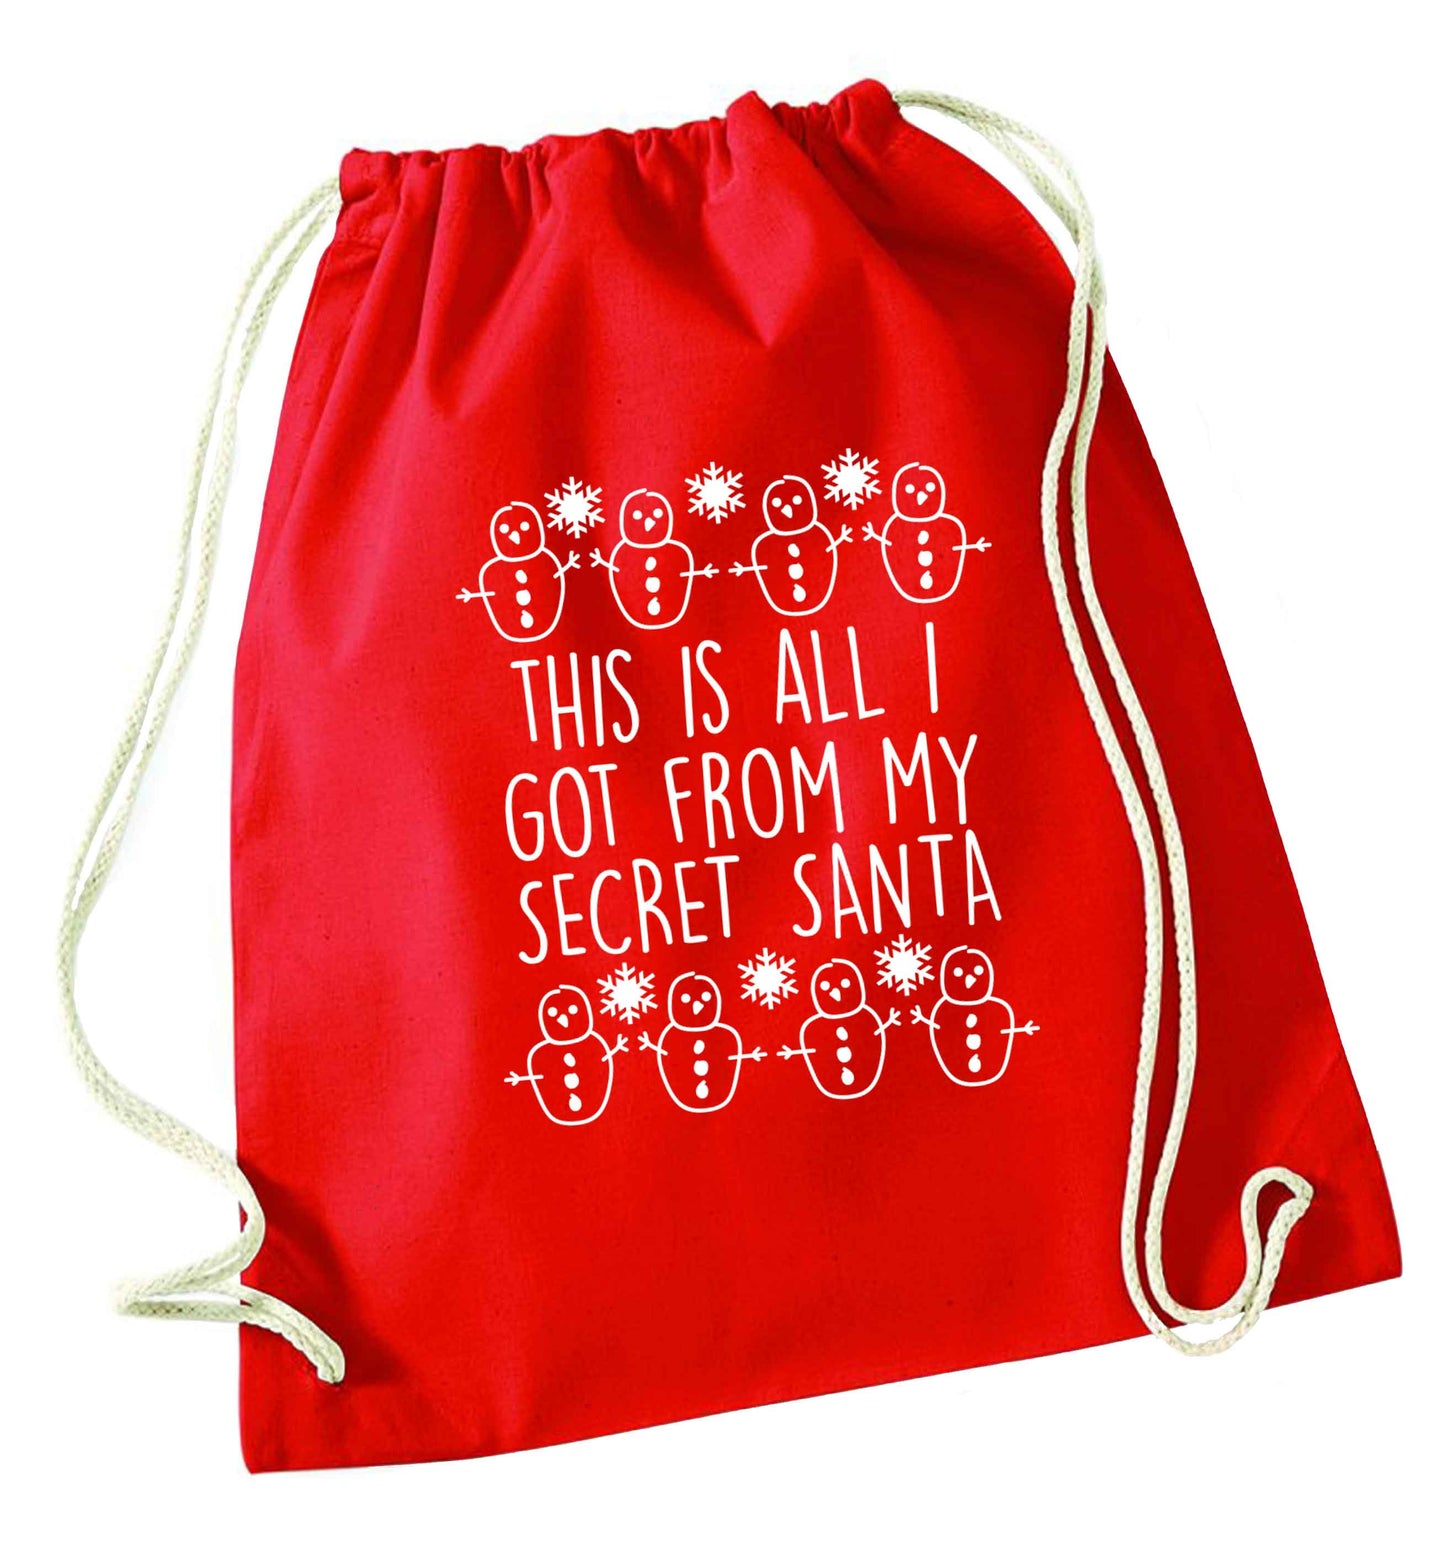 This is all I got from my secret Santa red drawstring bag 